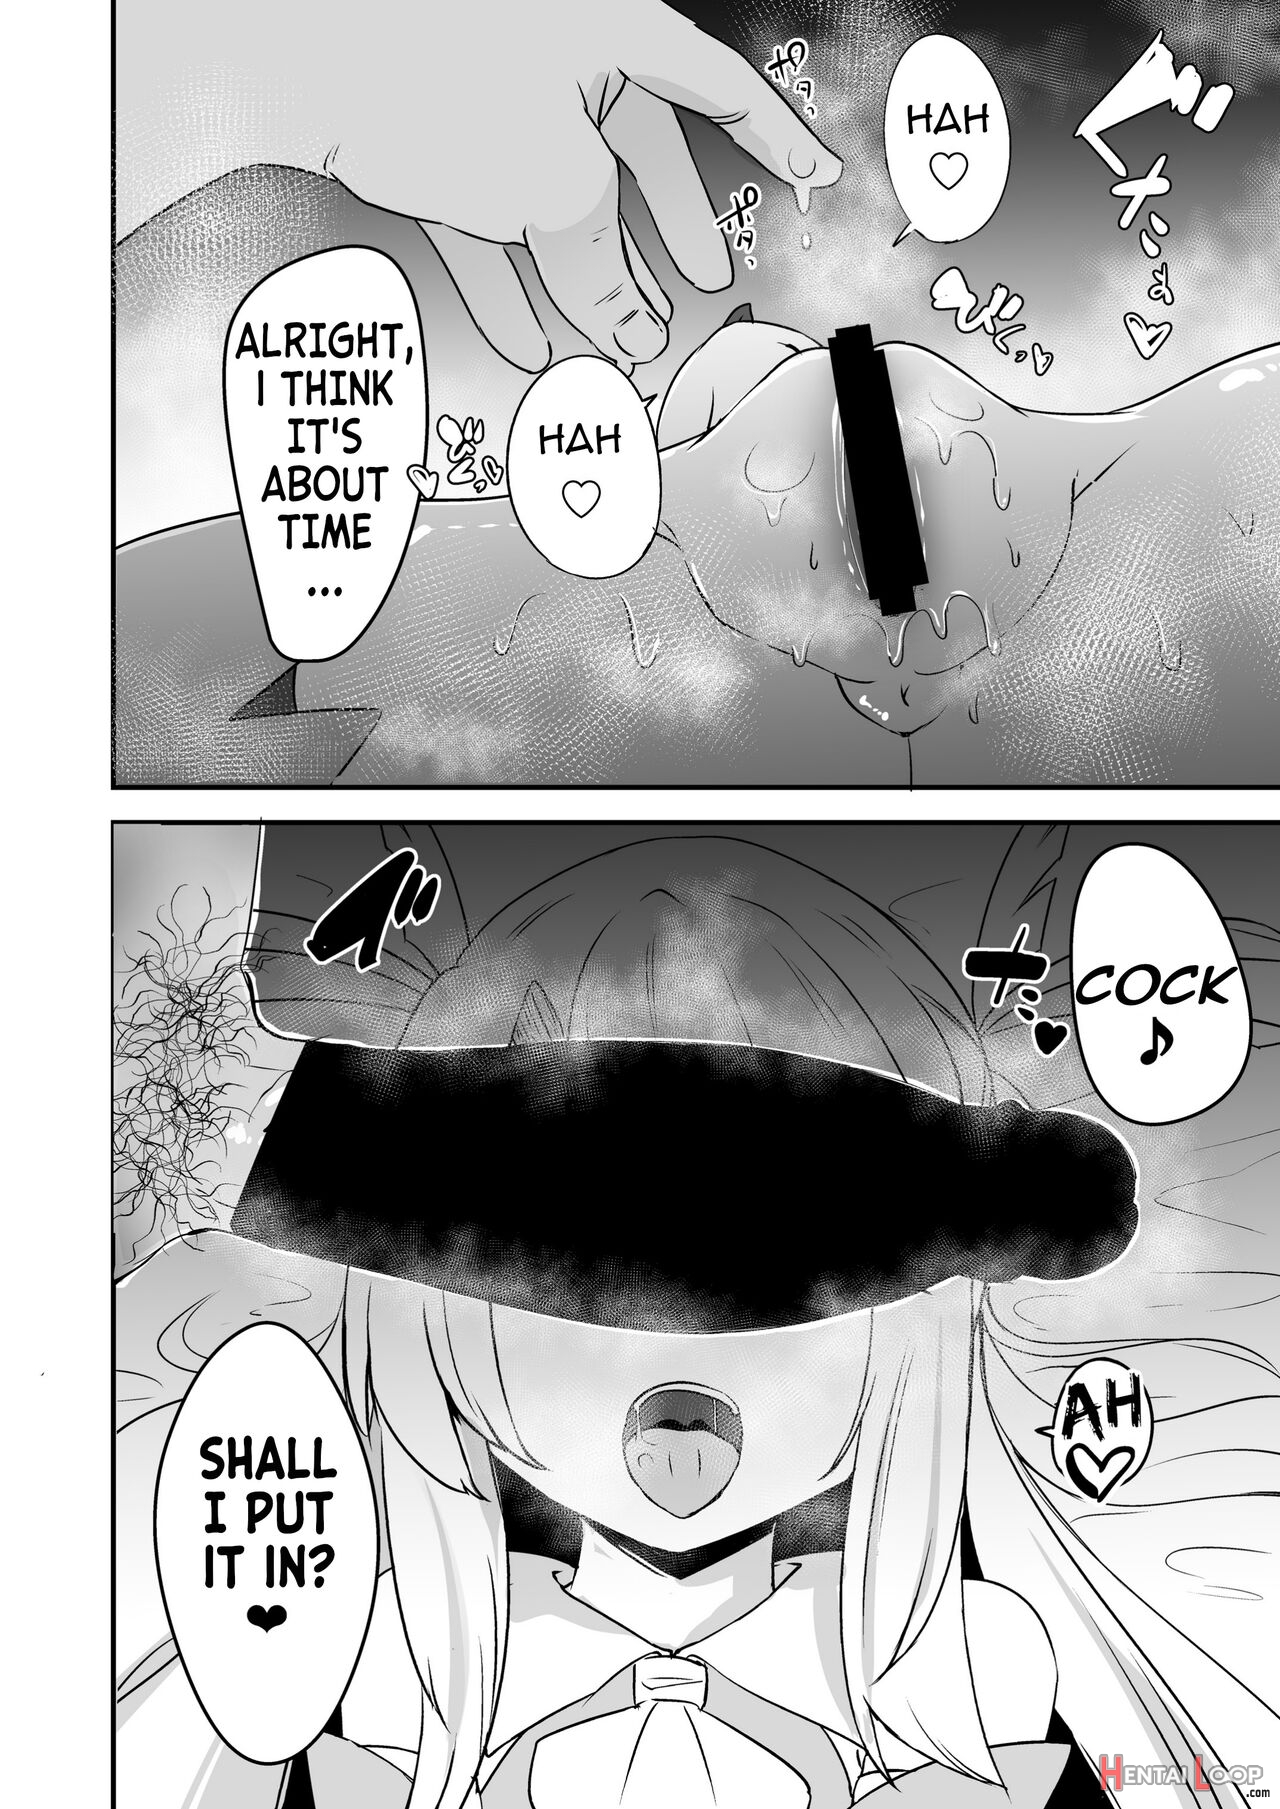 Doing Lewd Things With Oji-san page 11